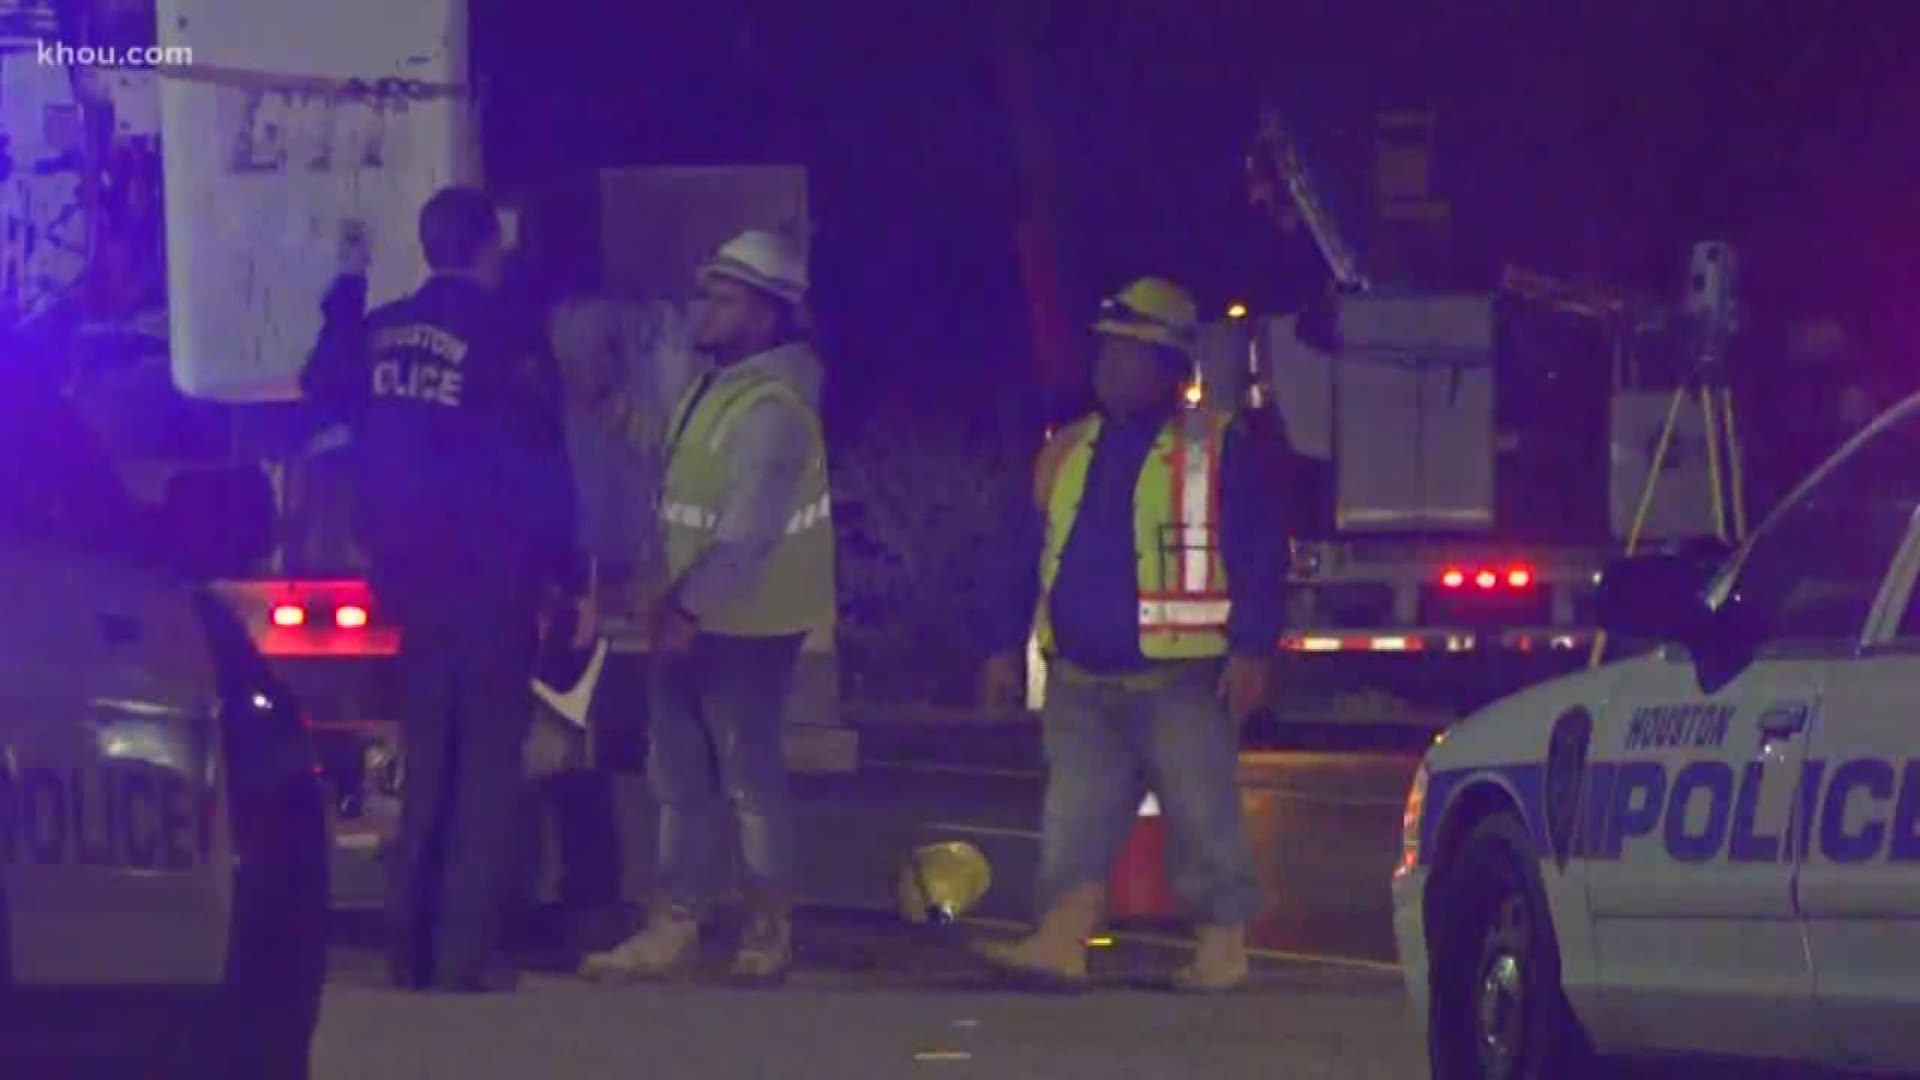 A utility crew worker was hit and killed while on the job near Webster late Monday night.